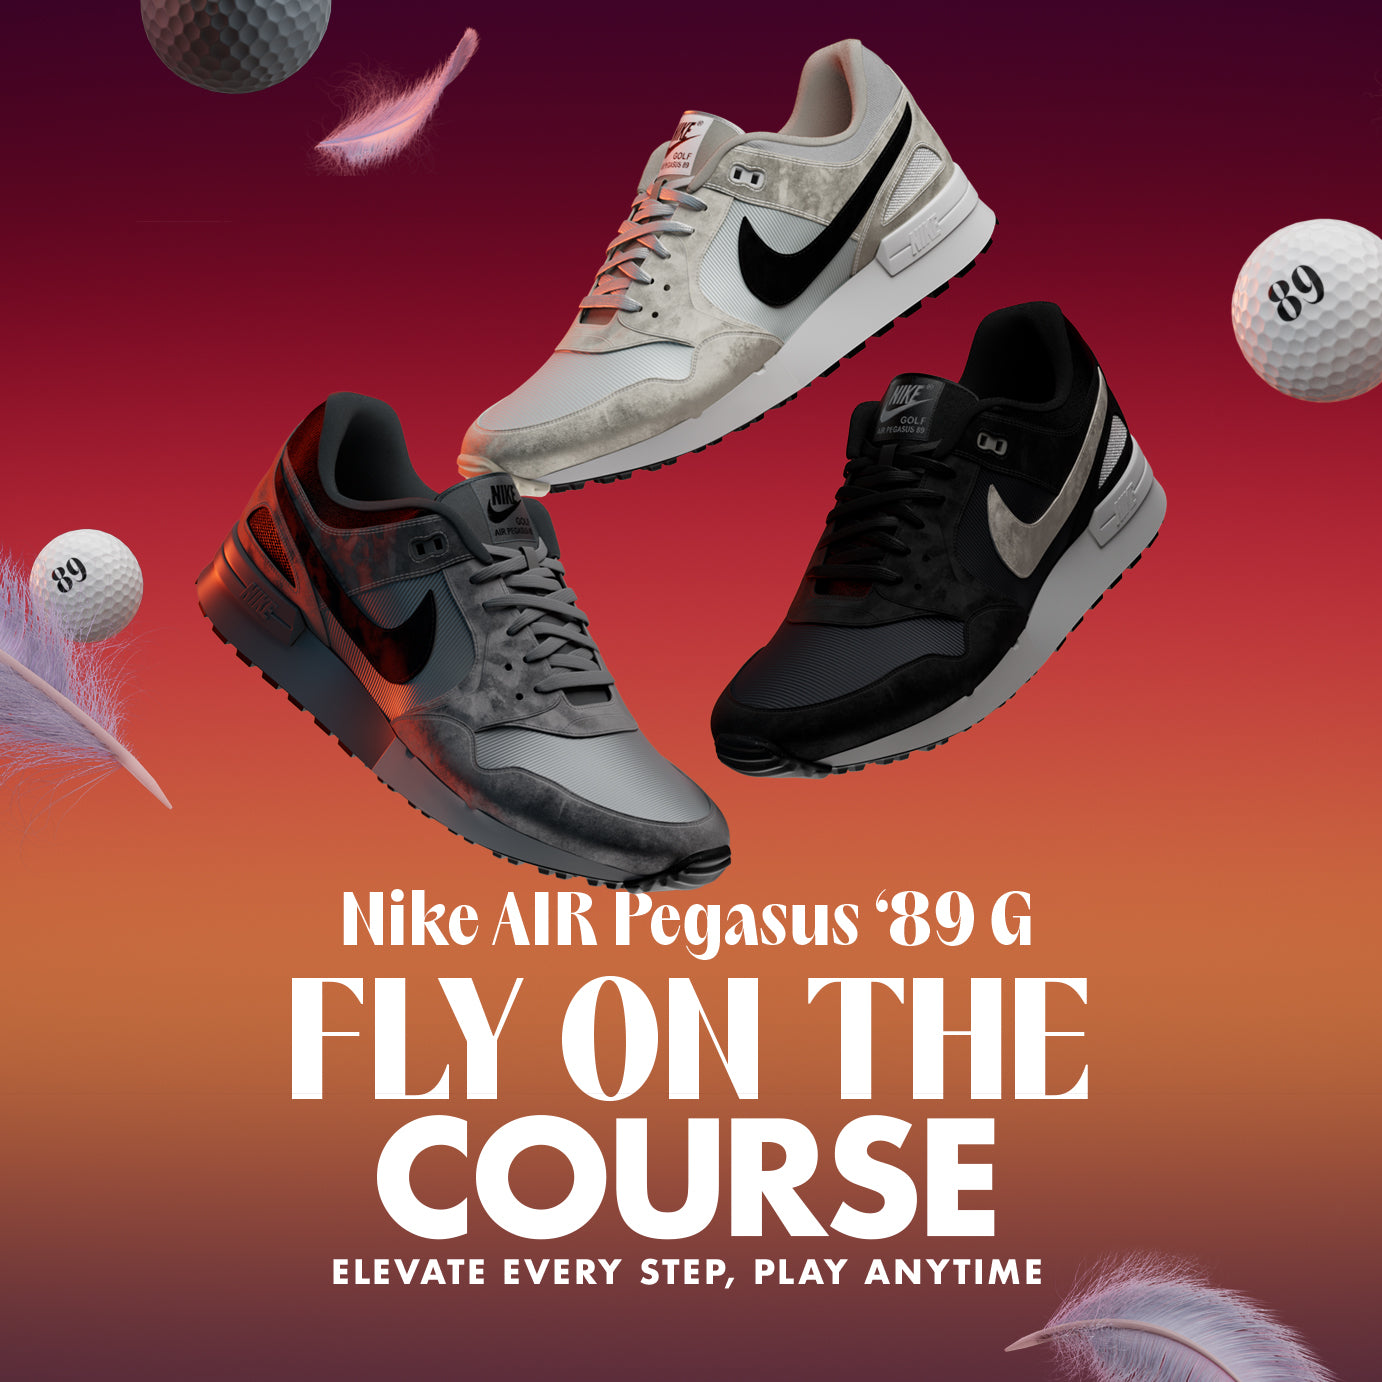 Nike Golf Shoes For Sale 